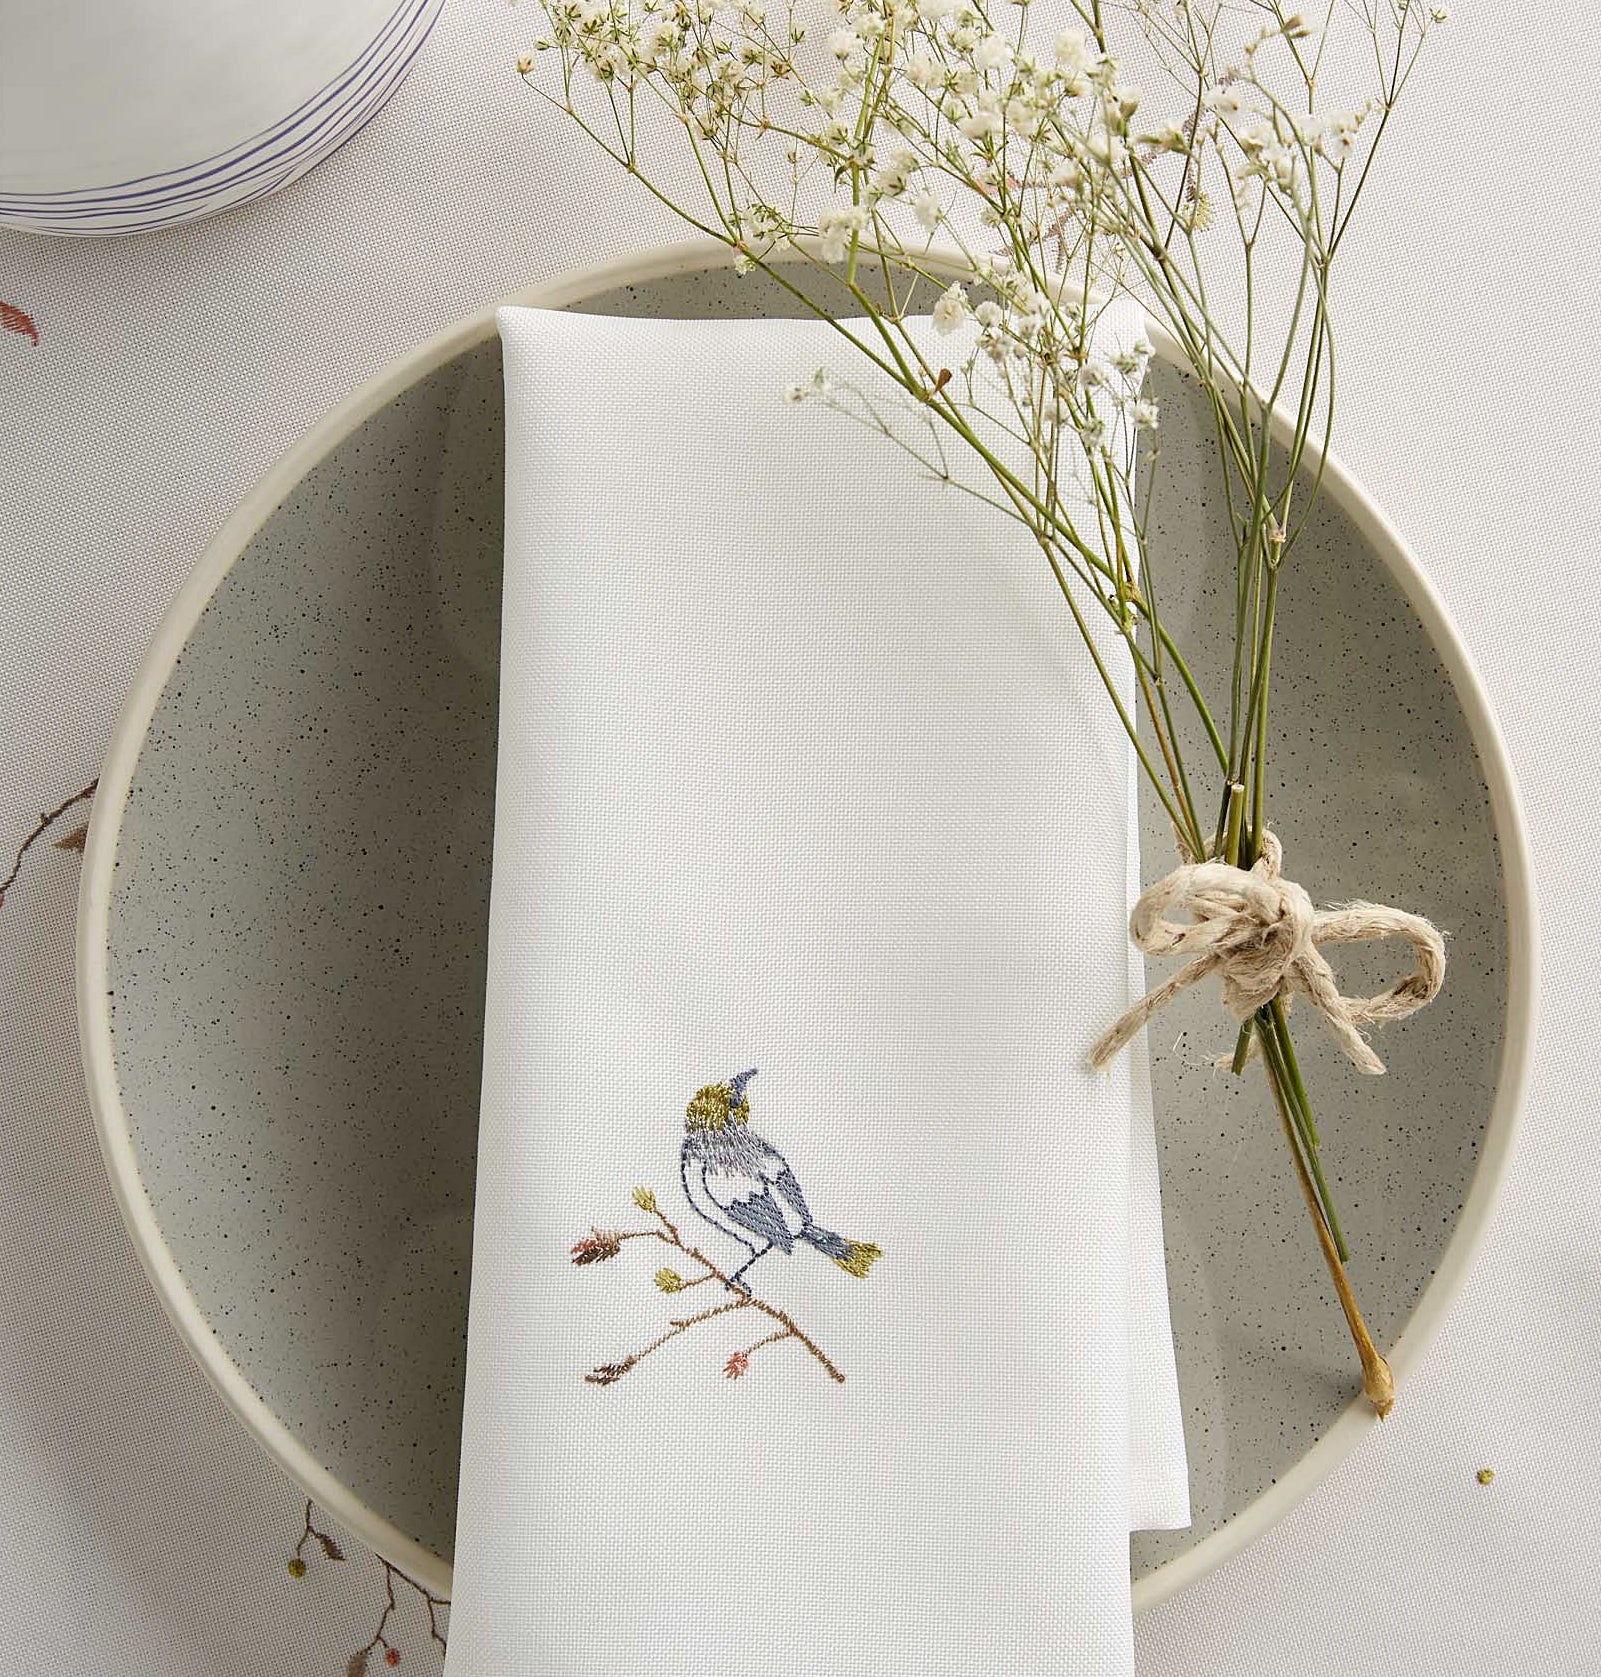 a napkin with a bird embroidered on it on a plate on a table